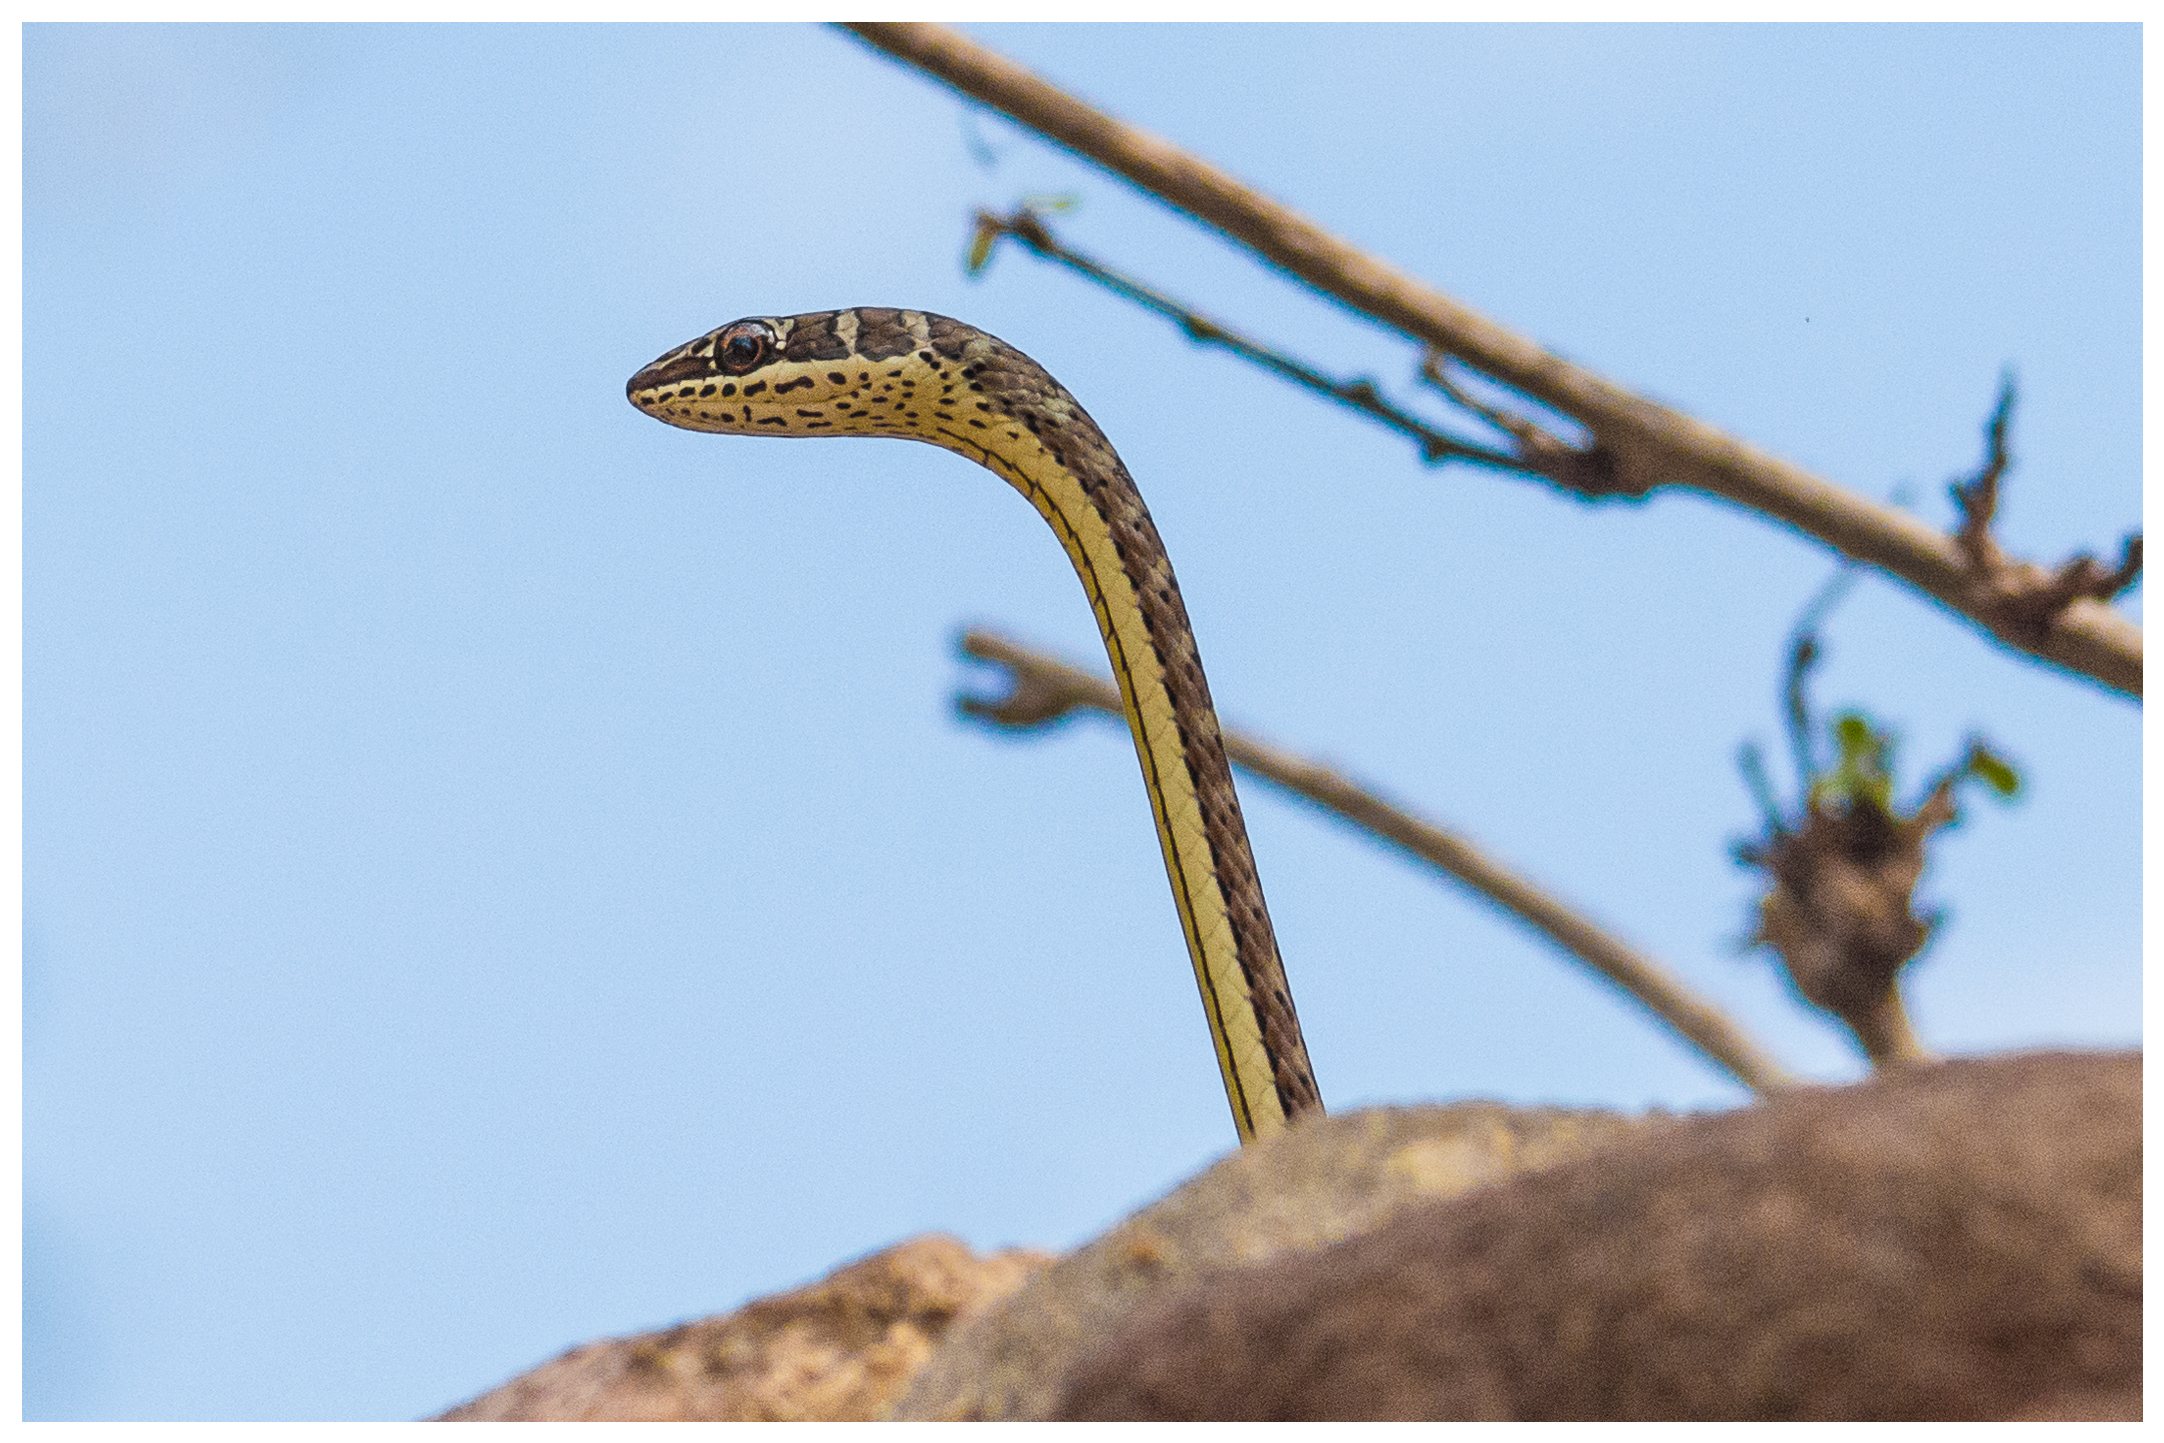 Yellow Bellied Sand Snake